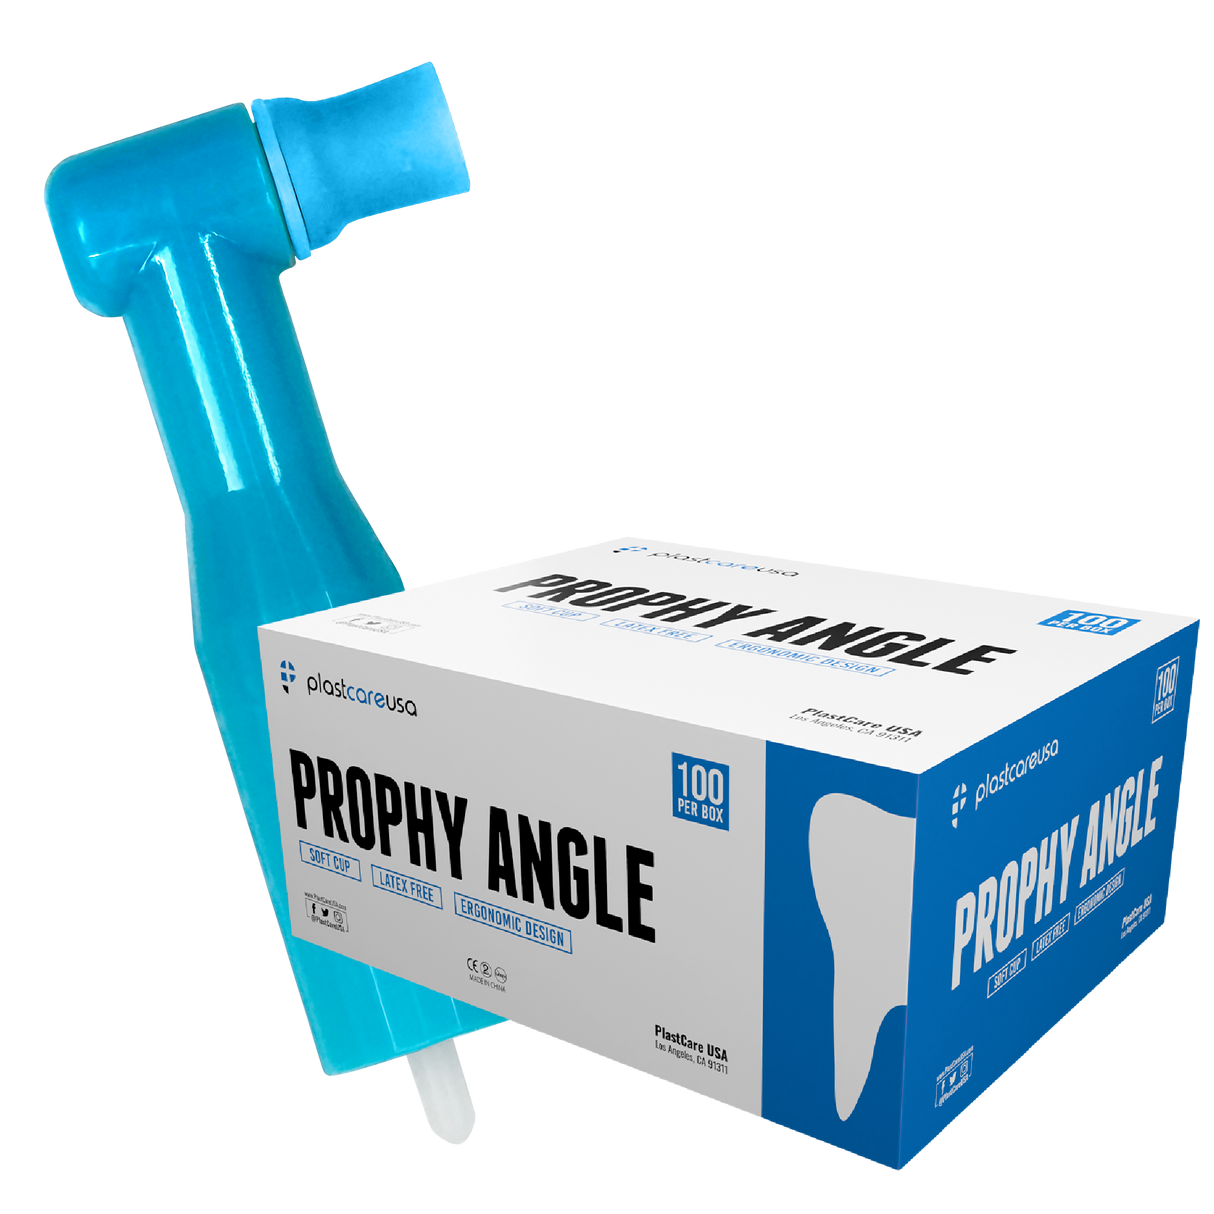 500 Prophy Angles Soft Cup, Disposable & Latex Free, (5 Boxes of 100)